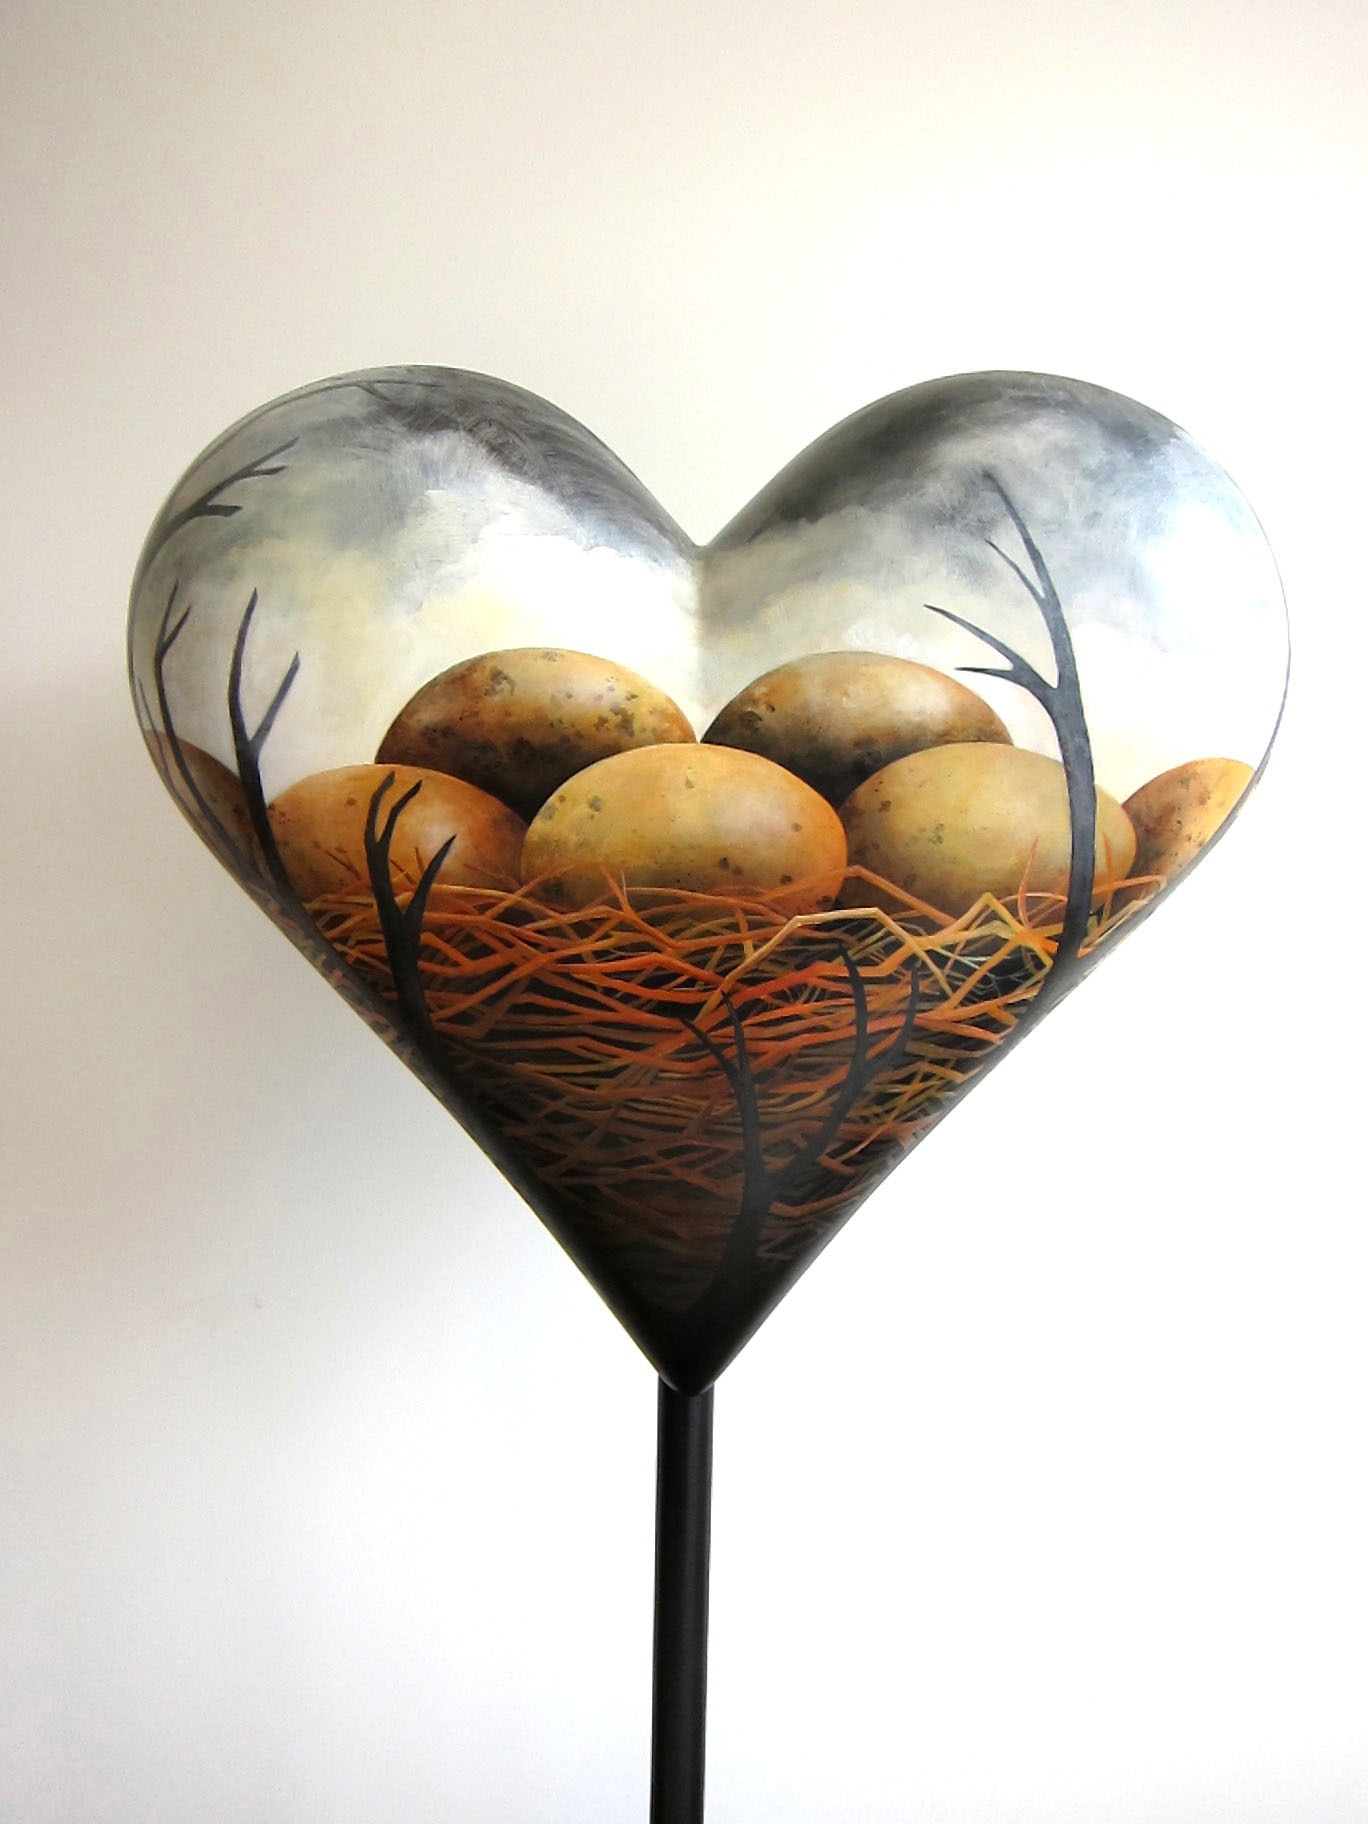 Photo provided by Anne John
This &quot;Rites of Spring&quot; heart statue by artist Anne John sold for $7,500 at The Beat Goes On - HeArts of Clark County gala Sept. 21. The statue received the highest bid of the 30 hearts auctioned.